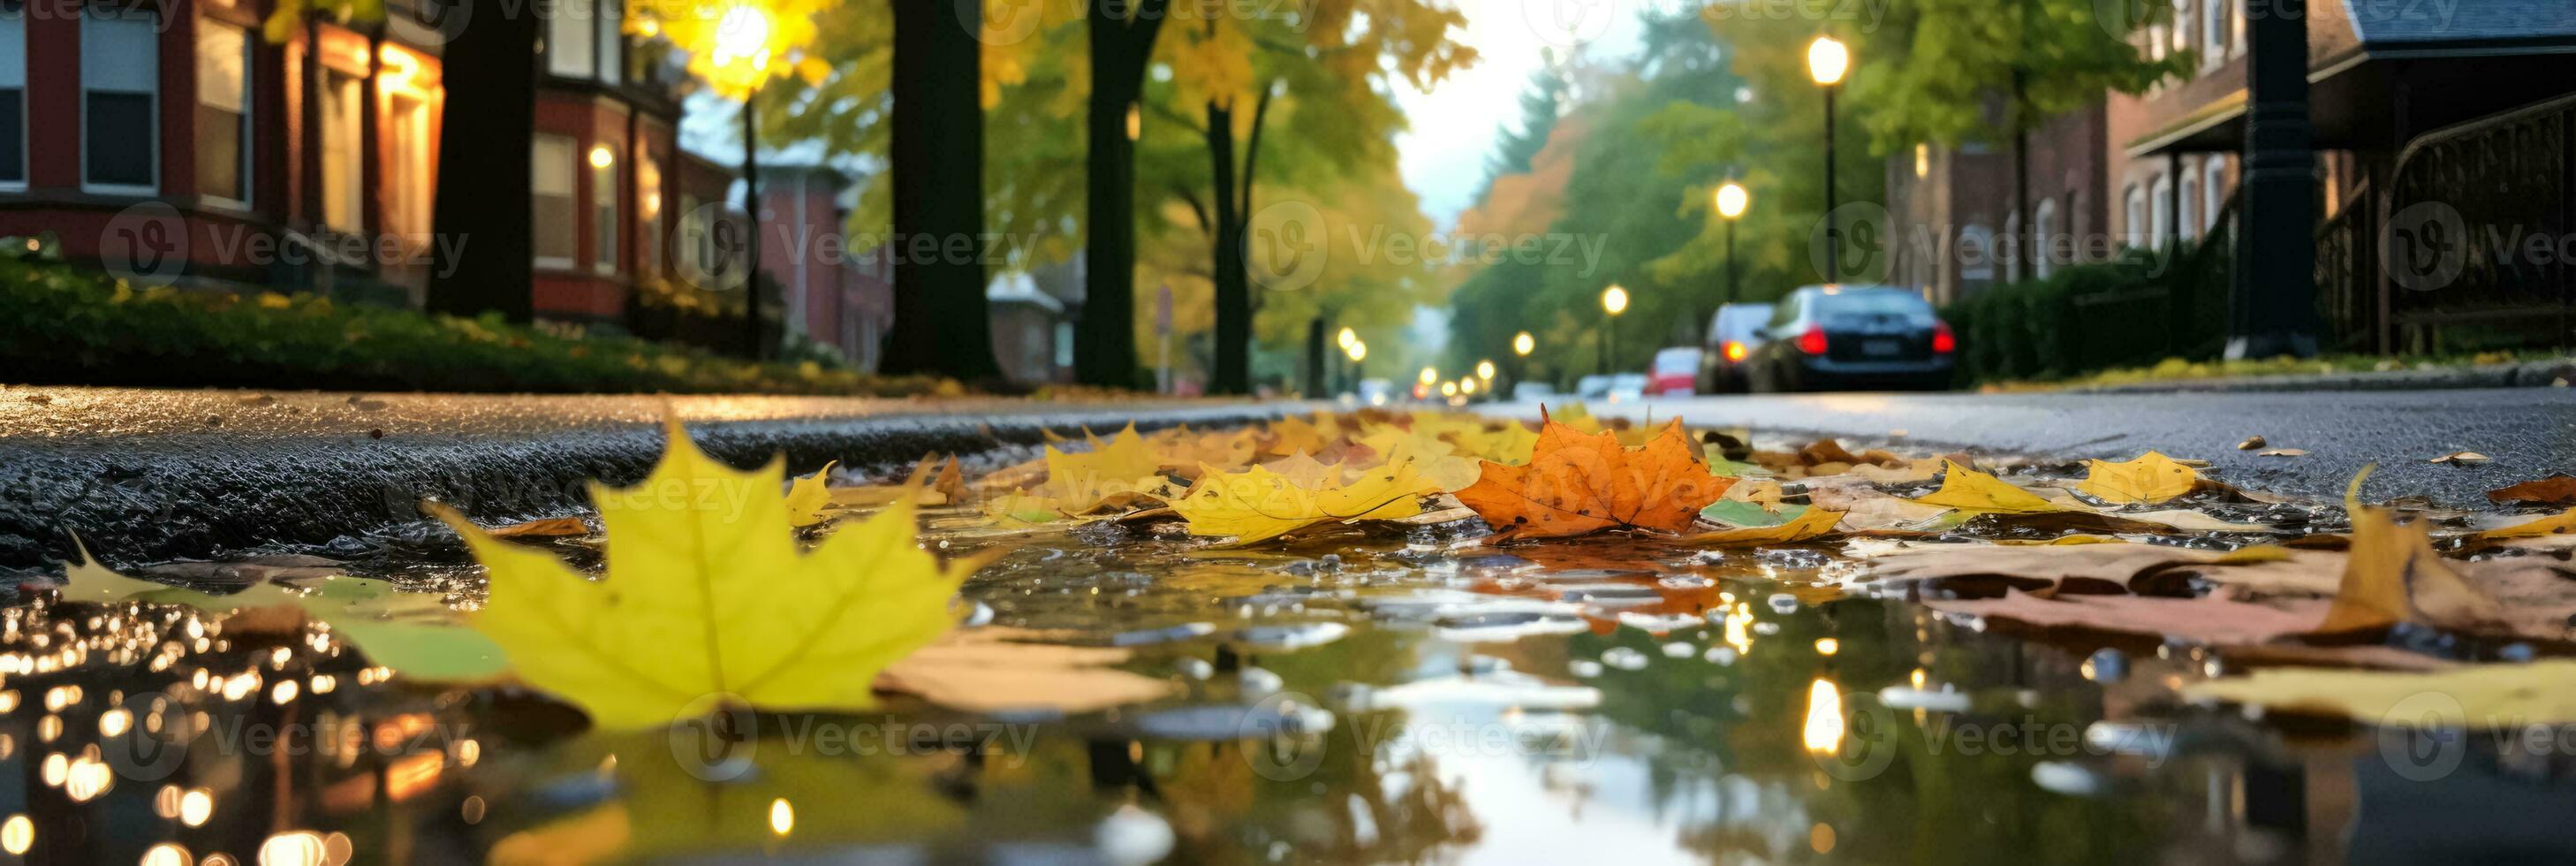 Leafy urban street reflecting an overcast sky in glistening puddles post rainstorm photo